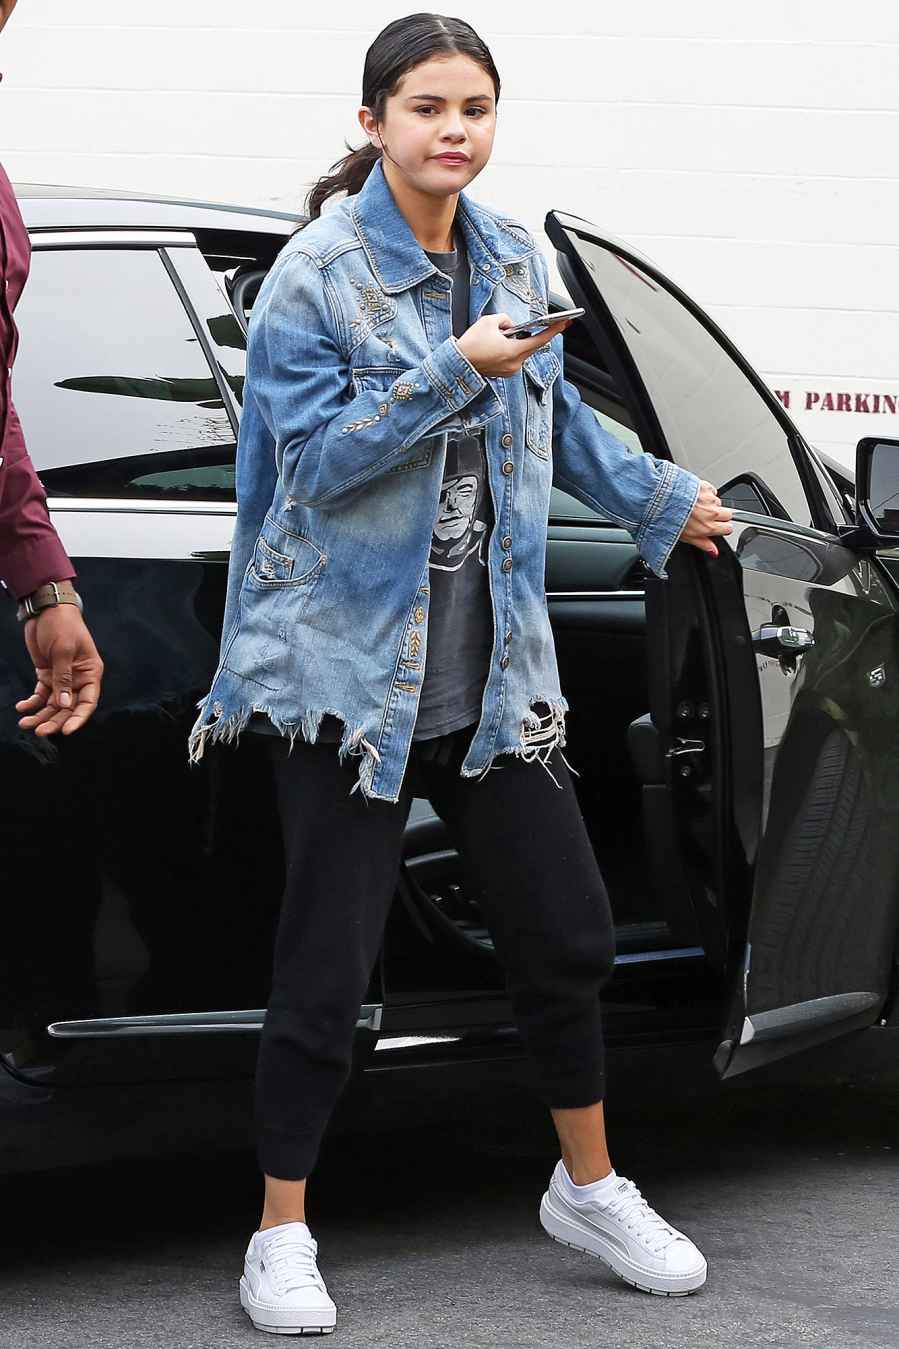 Selena Gomez Steps Out After Rehab Treatment